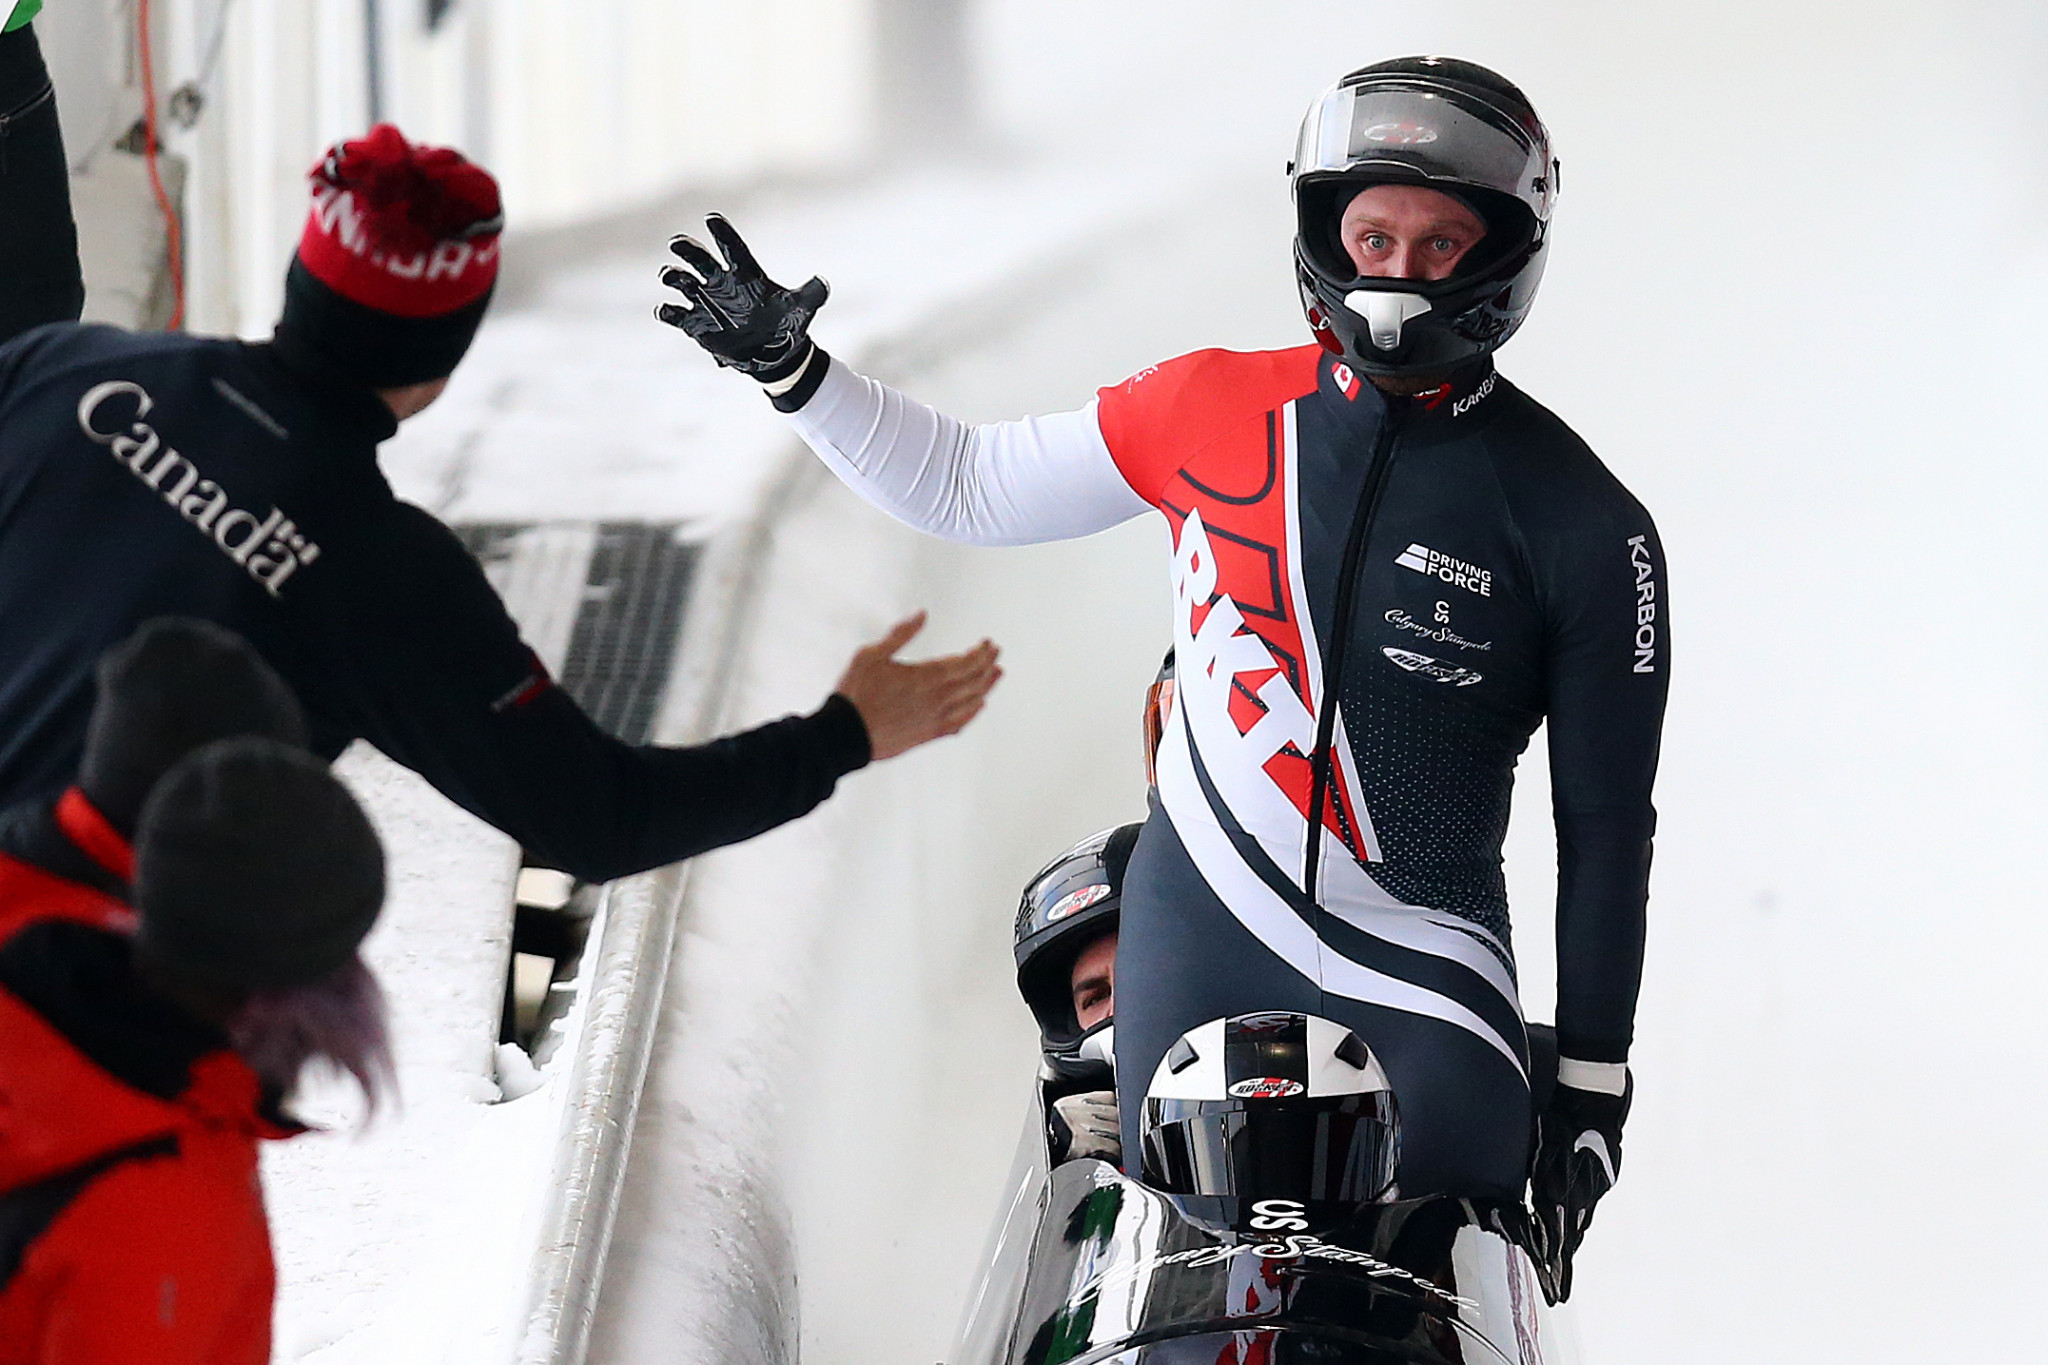 Bobsleigh Canada Skeleton will use recruitment drives to find the next generation of Olympic athletes ©Getty Images